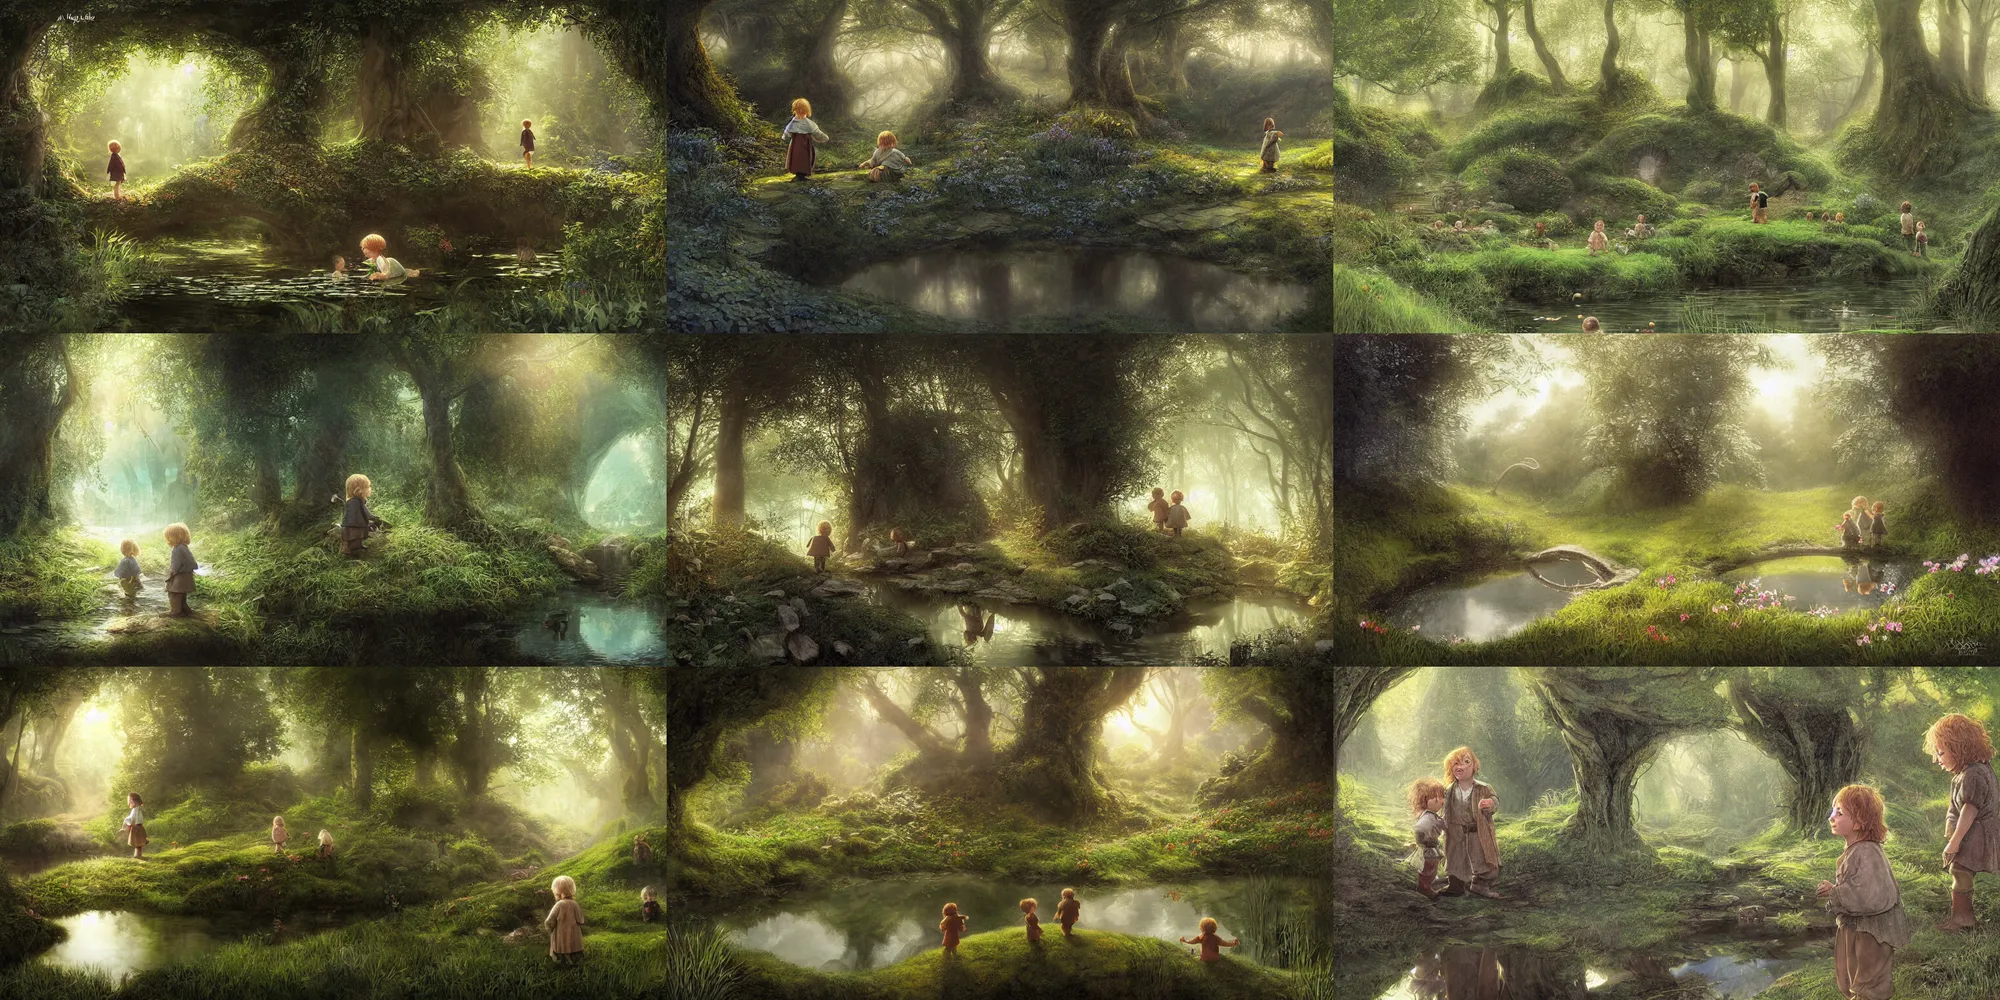 Prompt: two hobbit children backlit near a mirror like pond, by alan lee, springtime flowers and foliage in full bloom, dark foggy forest background, sunlight filtering through the trees, digital art, art station.